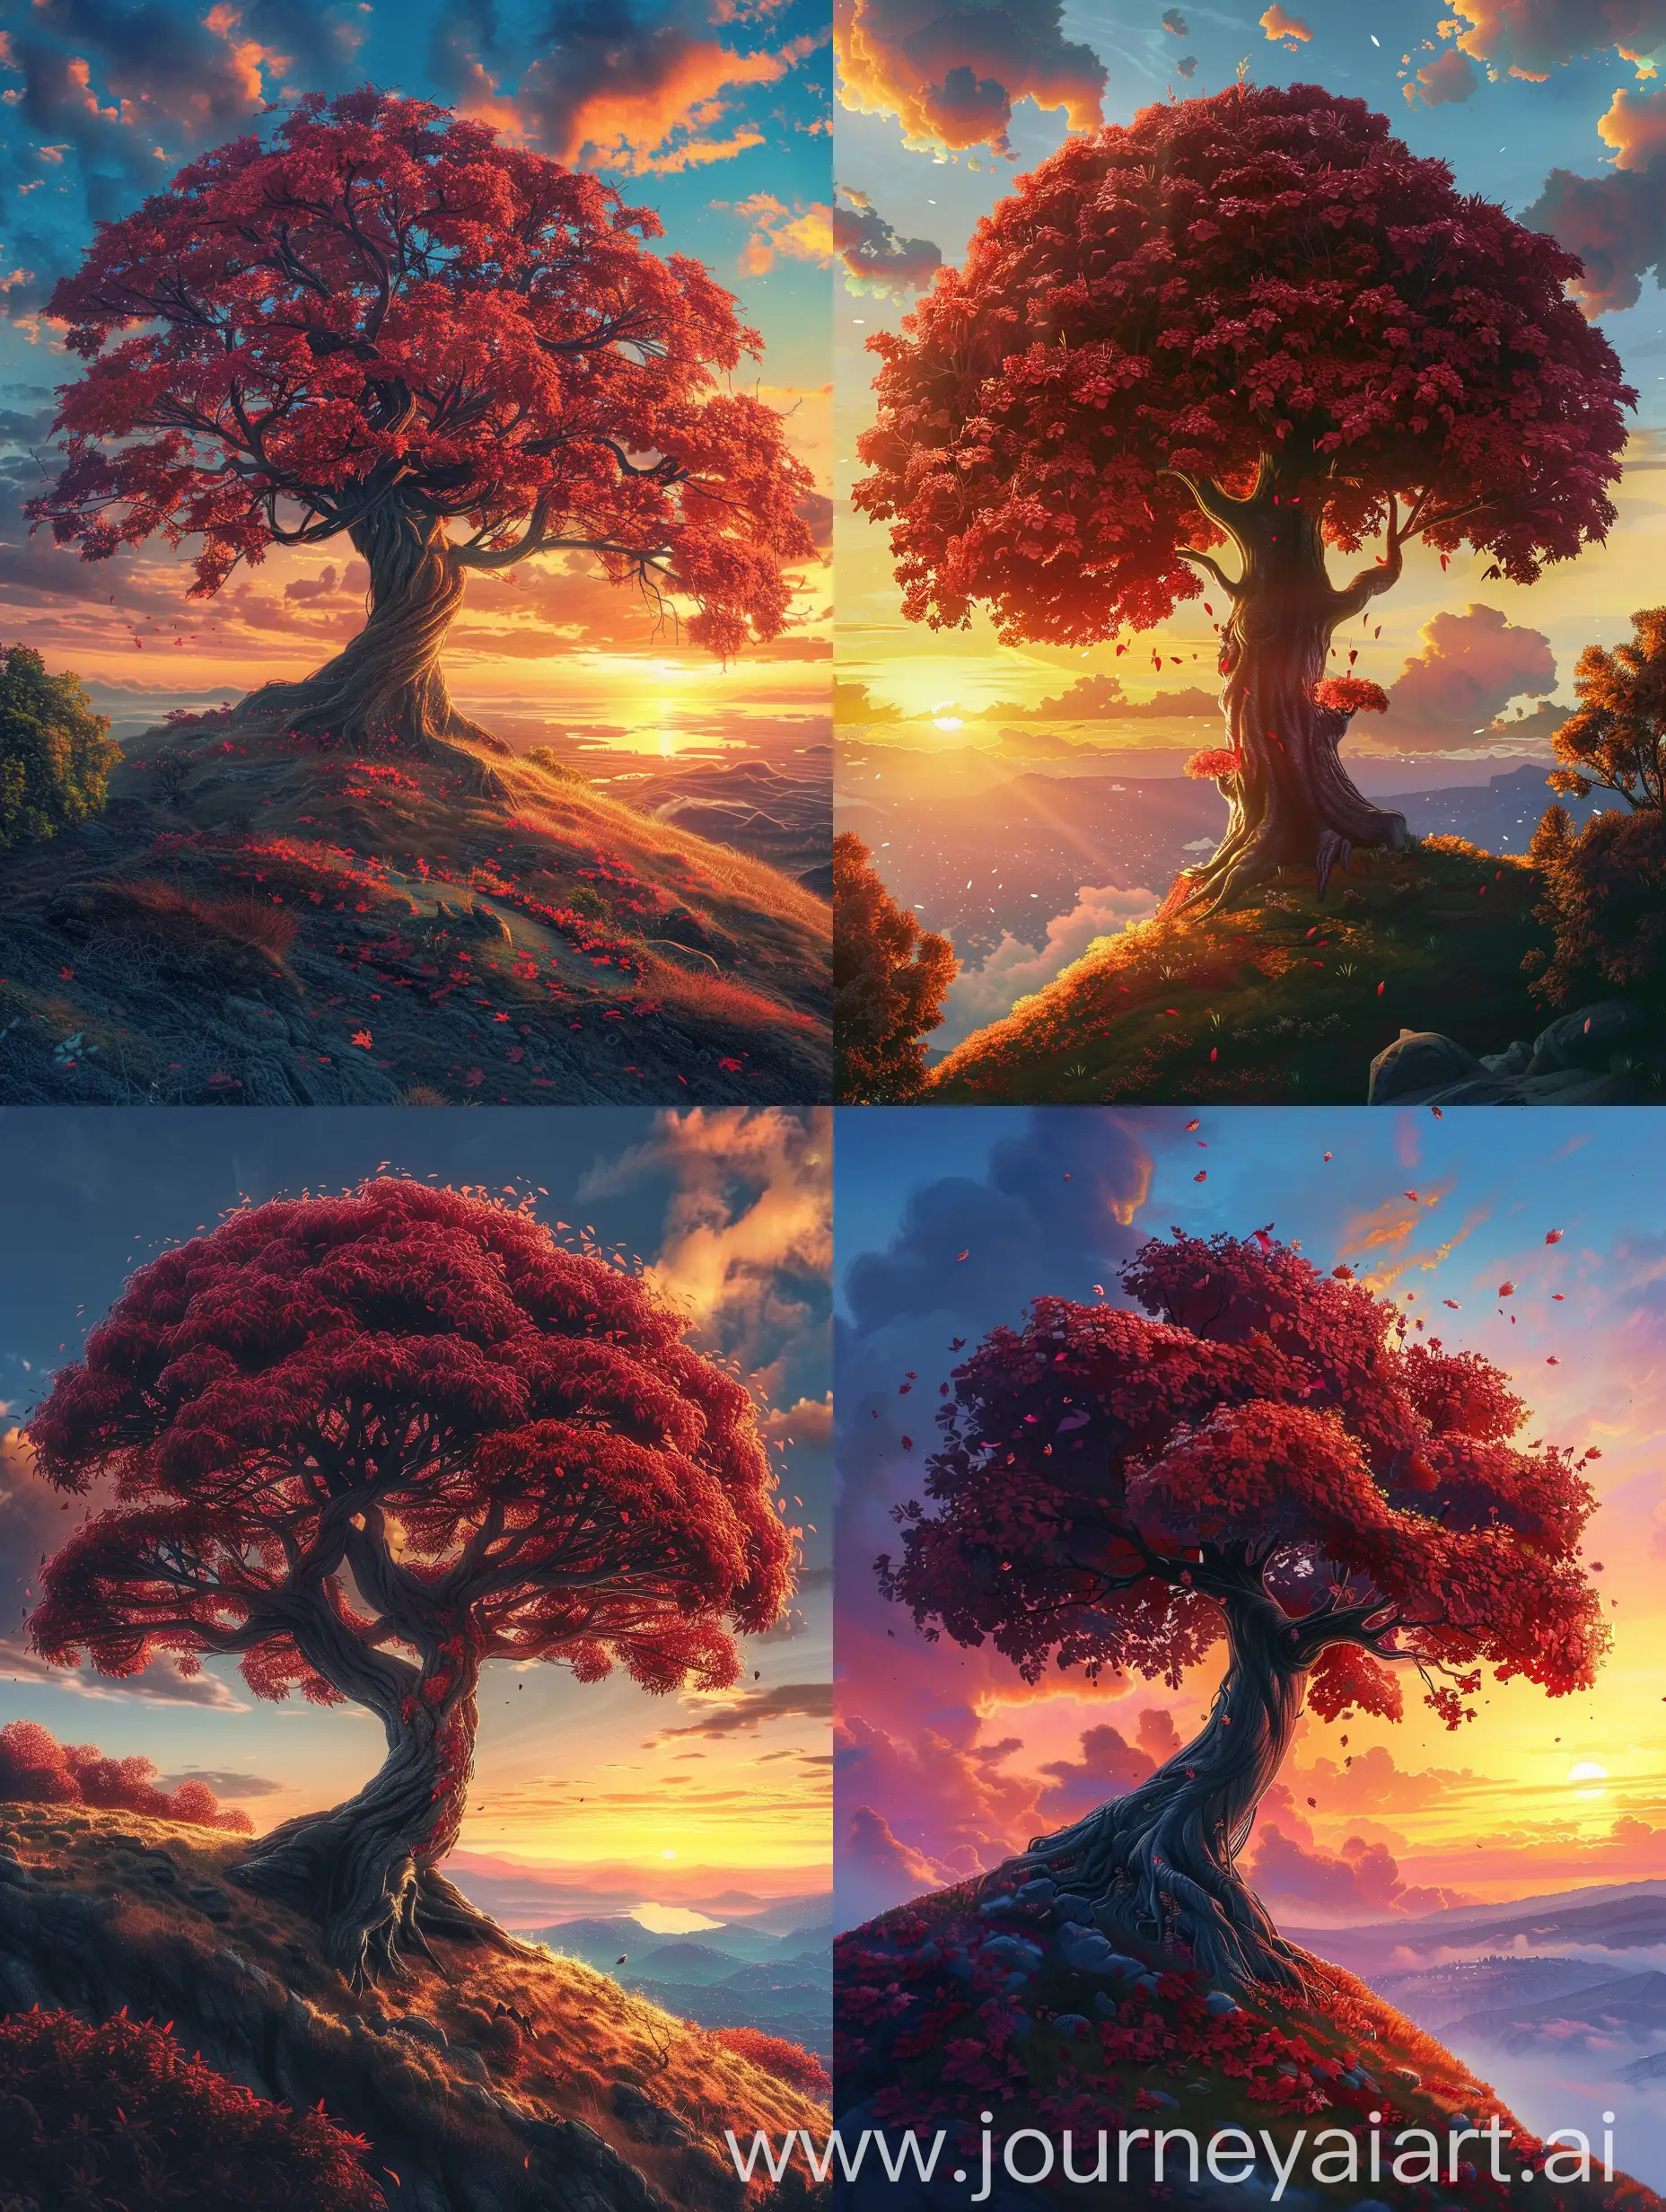 painting of a huge tree with red leaves on a hill with a sunset in the background, beautiful art uhd 4 k, 4k highly detailed digital art, dream scenery art, scenery artwork, 4k detailed digital art, anime landscape wallpaper, amazing wallpaper, detailed painting 4 k, dreamy landscape, amazing landscape, 4 k hd wallpaper very detailed, a beautiful landscape, fantasy art landscape

